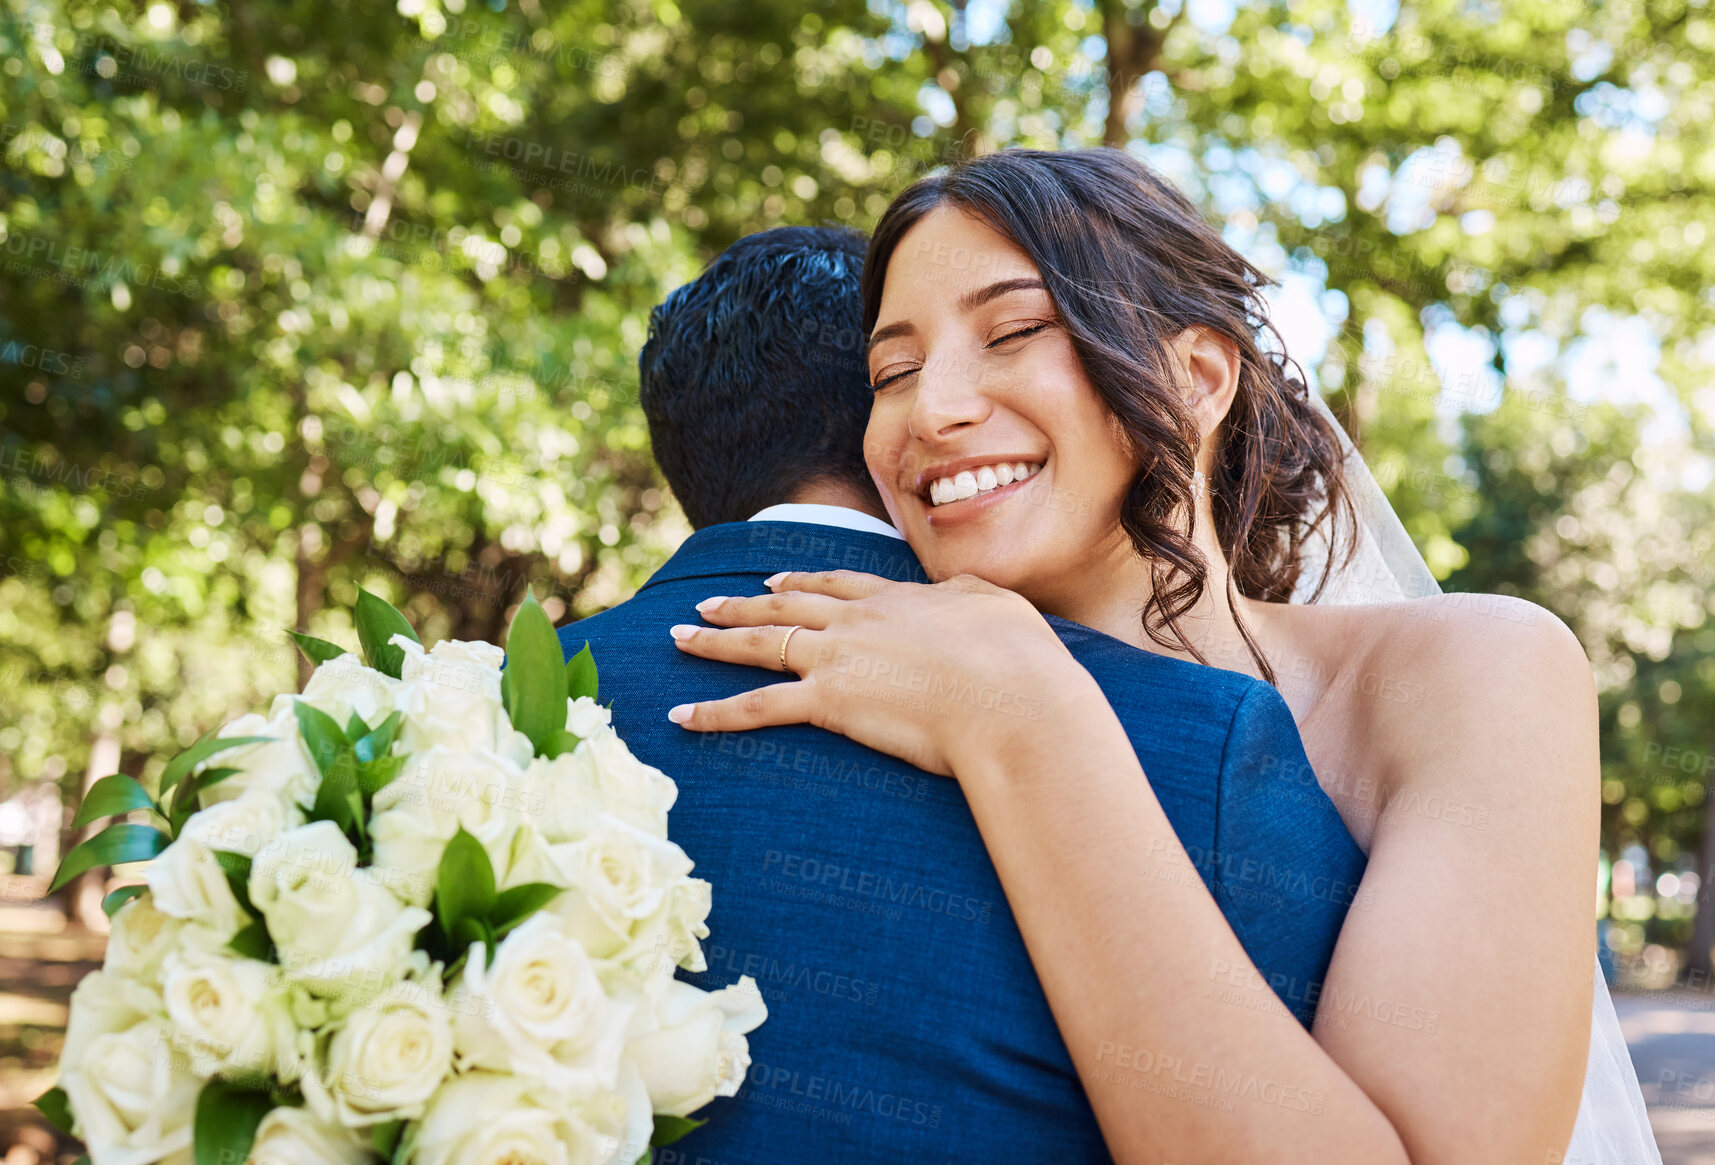 Buy stock photo Beautiful joyful bride holding bouquet and embracing her husband. Happy newlywed couple hugging and looking happy on their wedding day against nature background